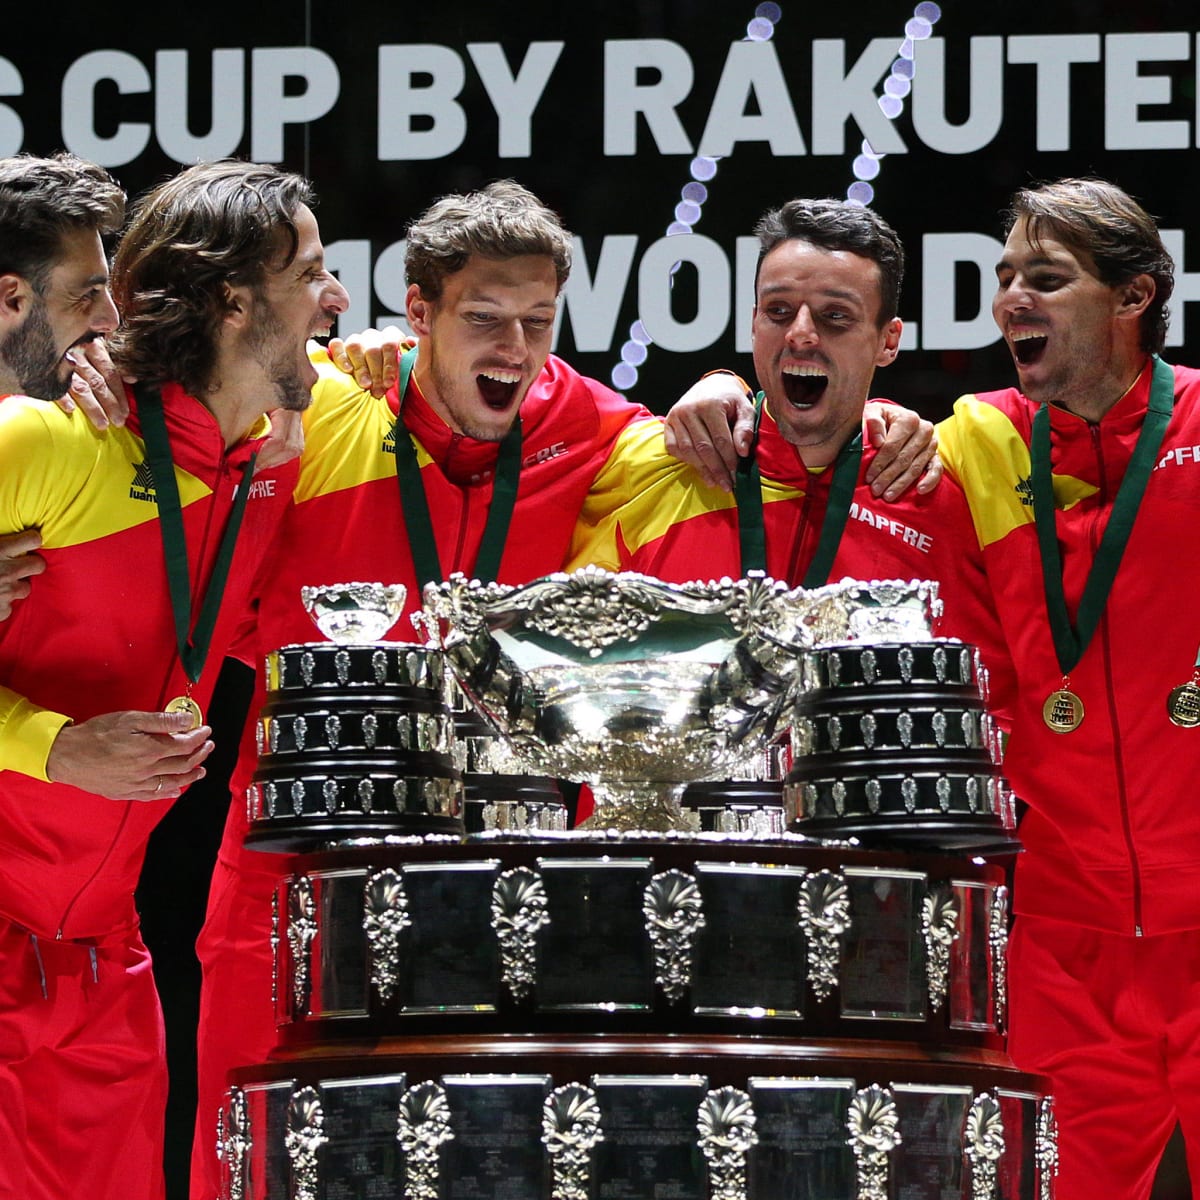 emne romantisk tale Davis Cup 2019: Questions, improvements on new format - Sports Illustrated